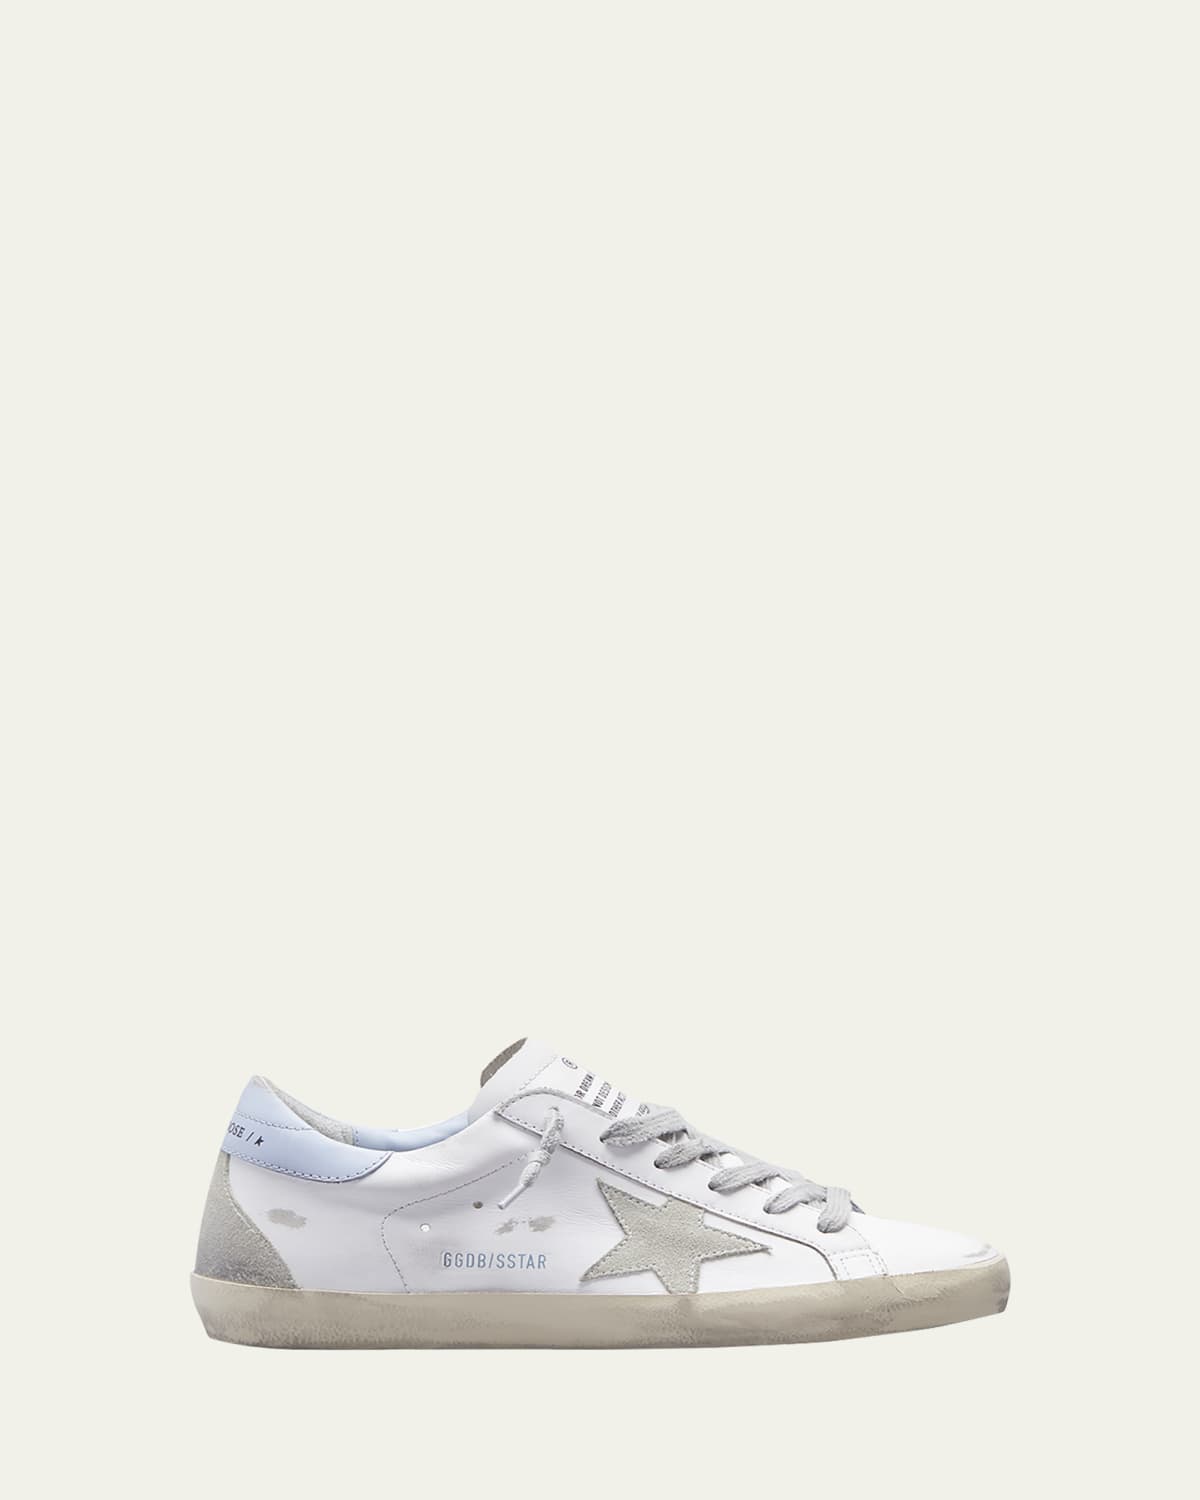 Superstar Leather Upper And Heel Suede Star And Spur Cream Sole Sneakers | Bergdorf Goodman